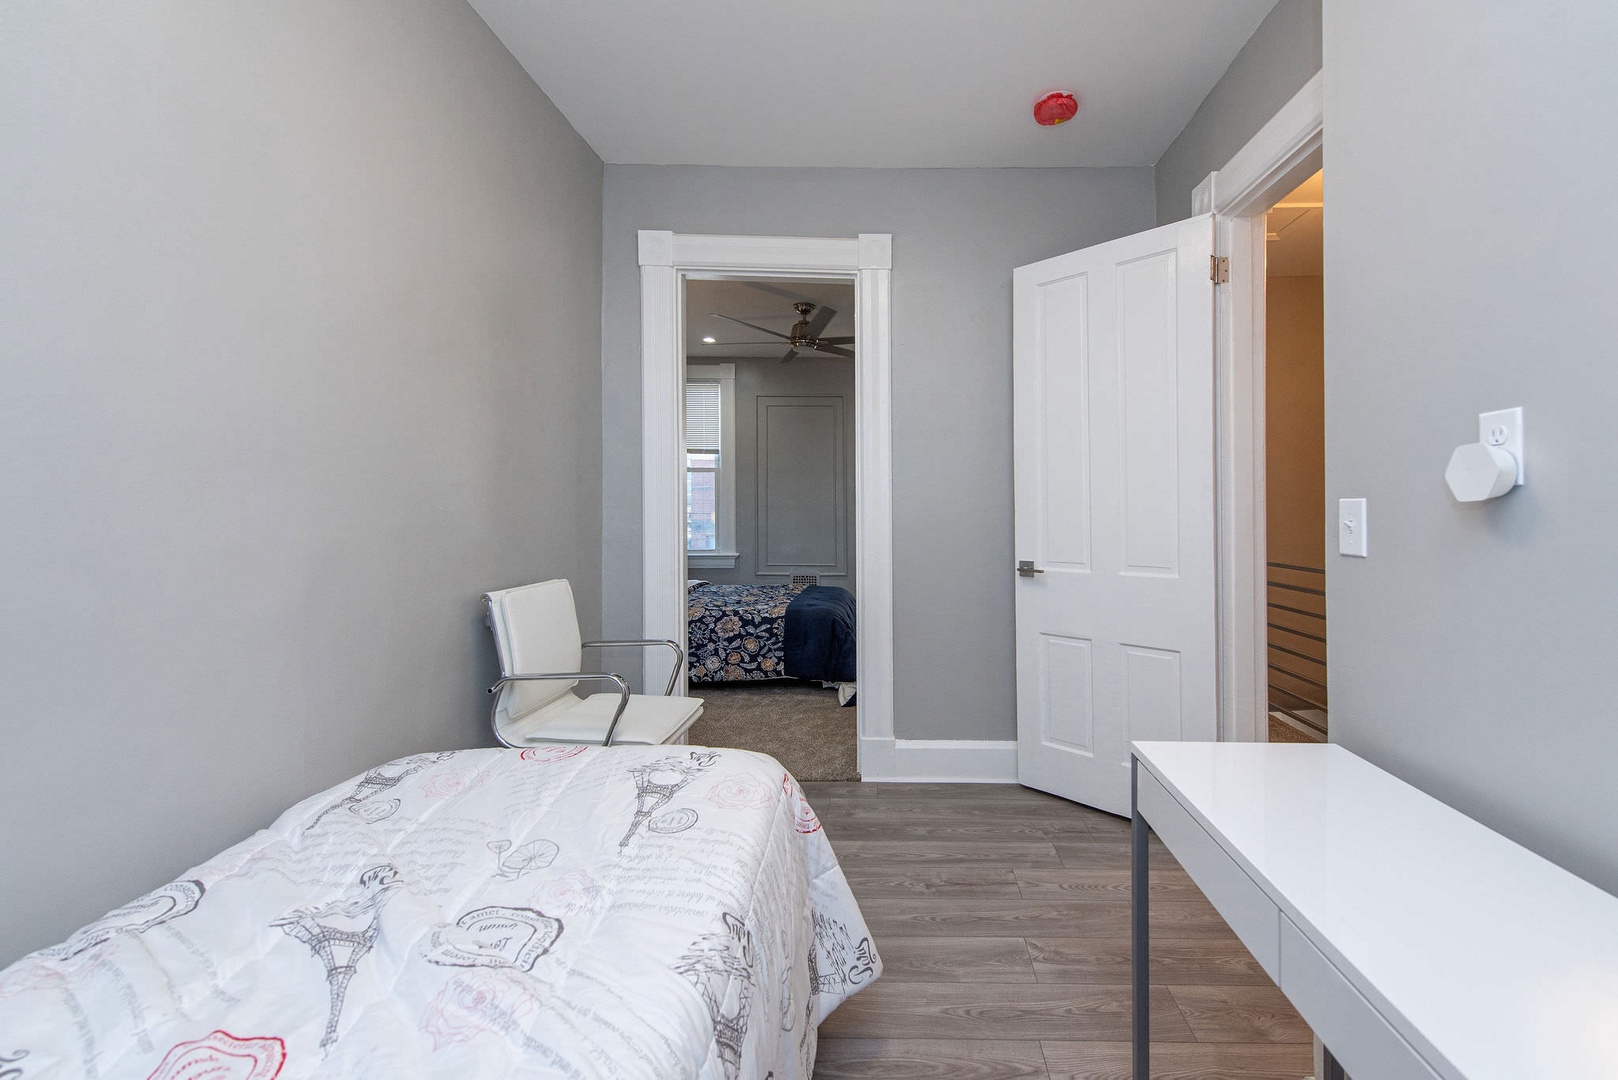 Suite 2 – The final bedroom includes a twin bed, chair, & desk/workspace